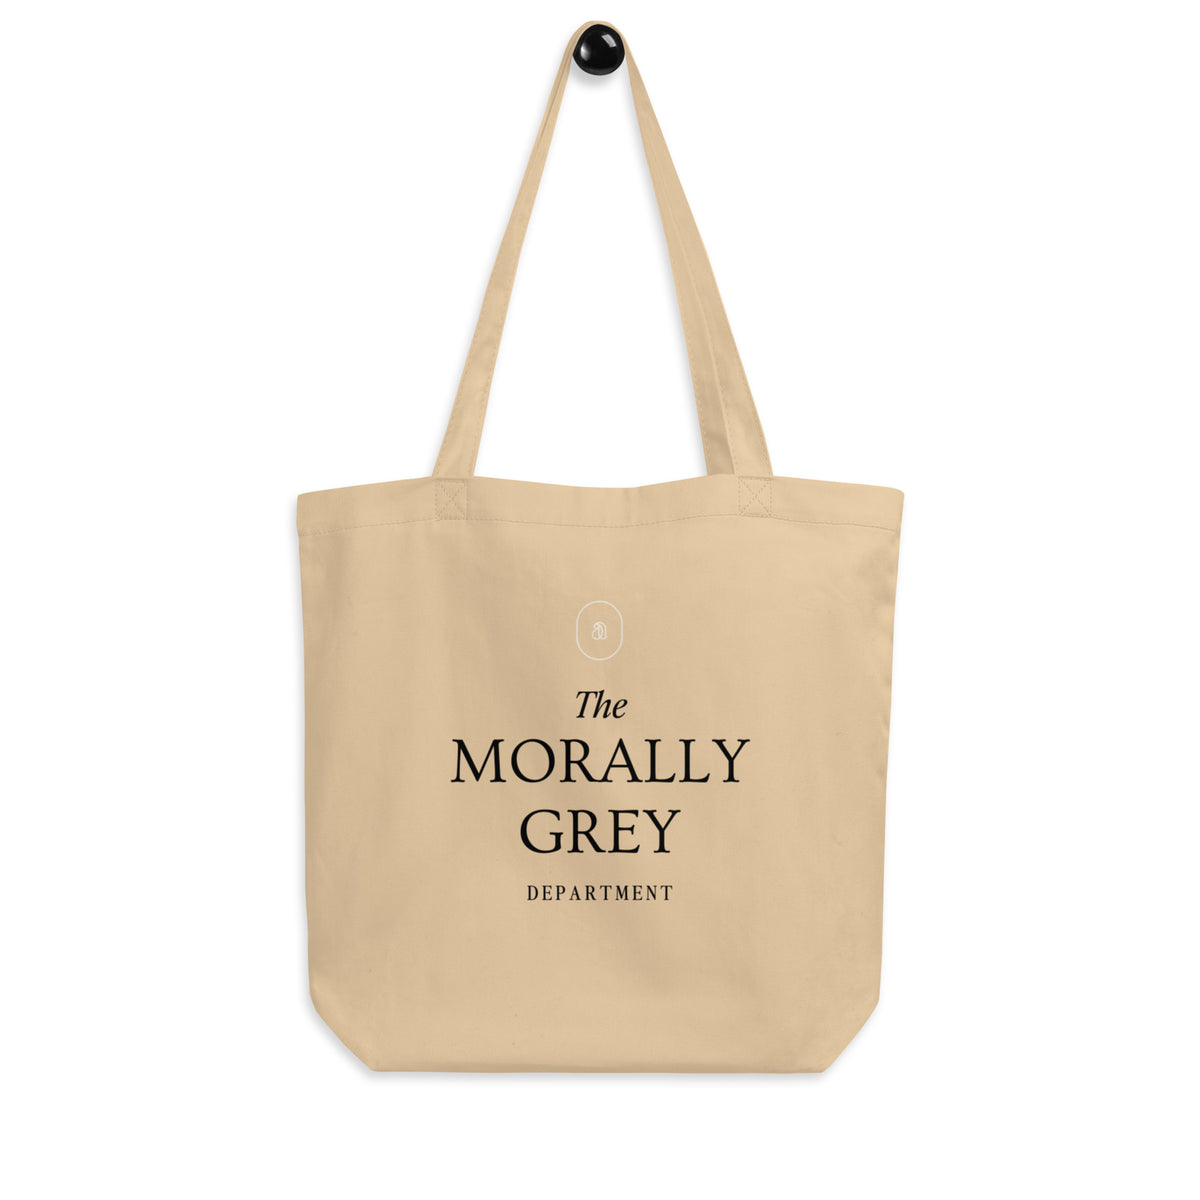 The Morally Grey Department - Eco Tote Bag